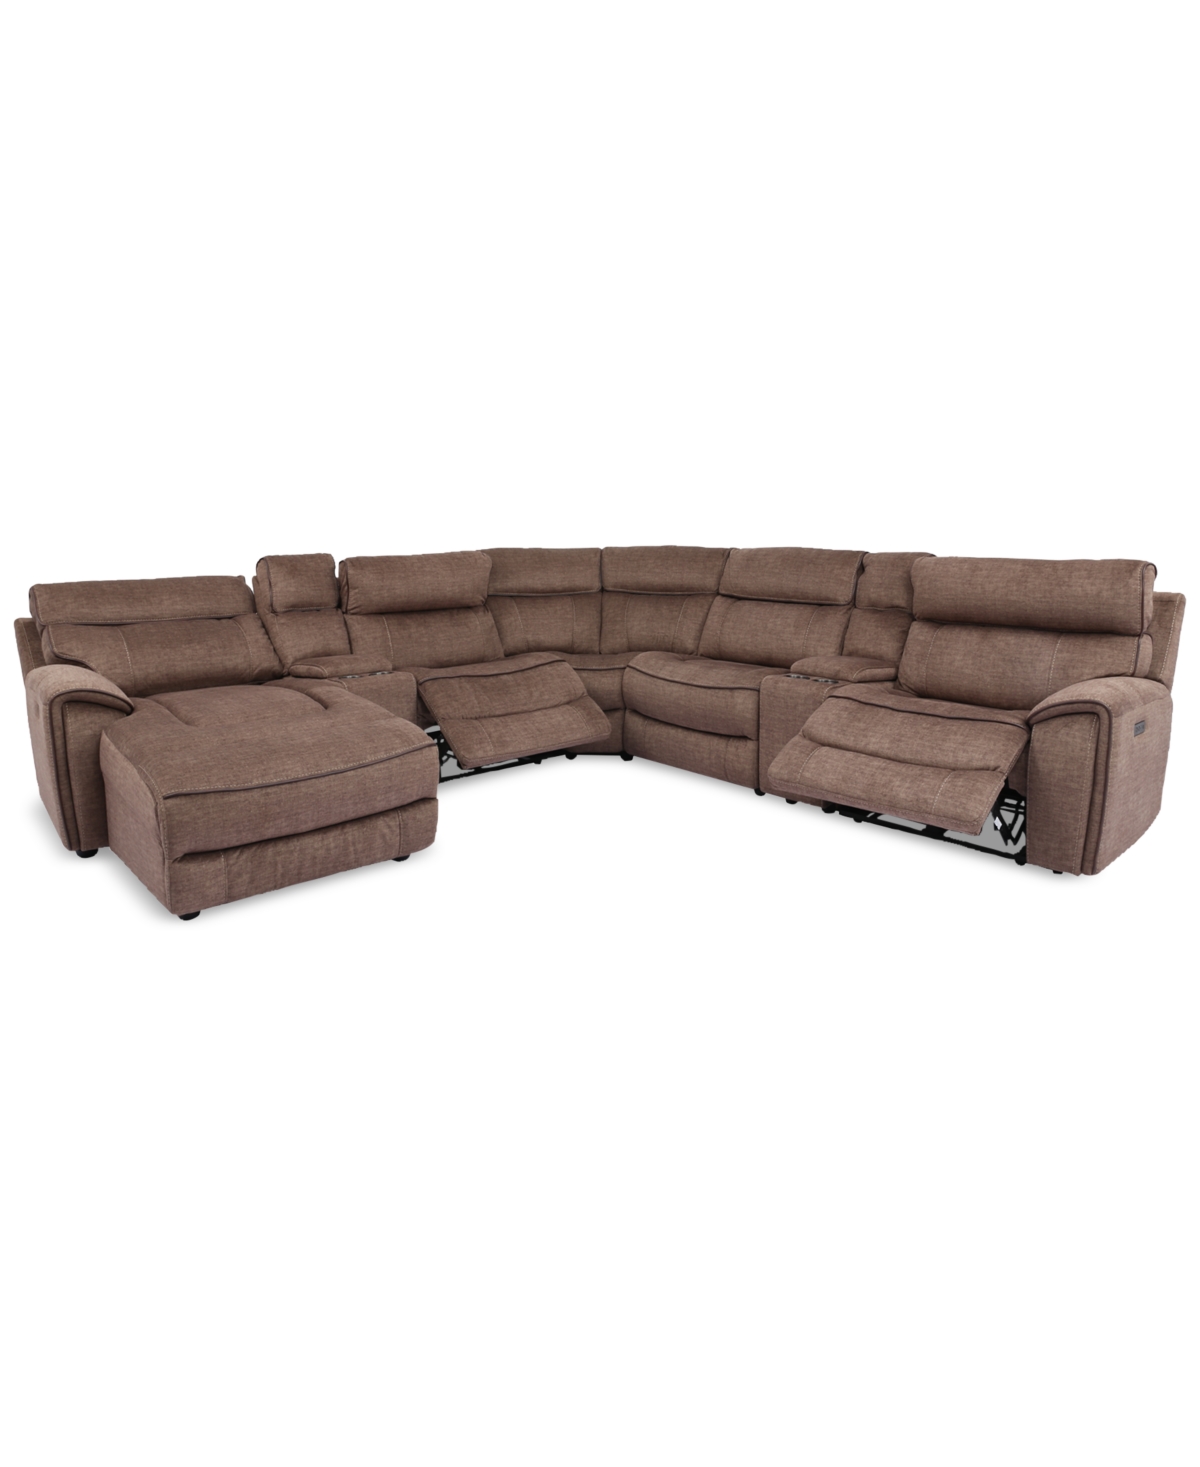 Furniture Hutchenson 7-pc. Fabric Chaise Sectional With 2 Power Recliners And 2usb Consoles In Chocolate Brown